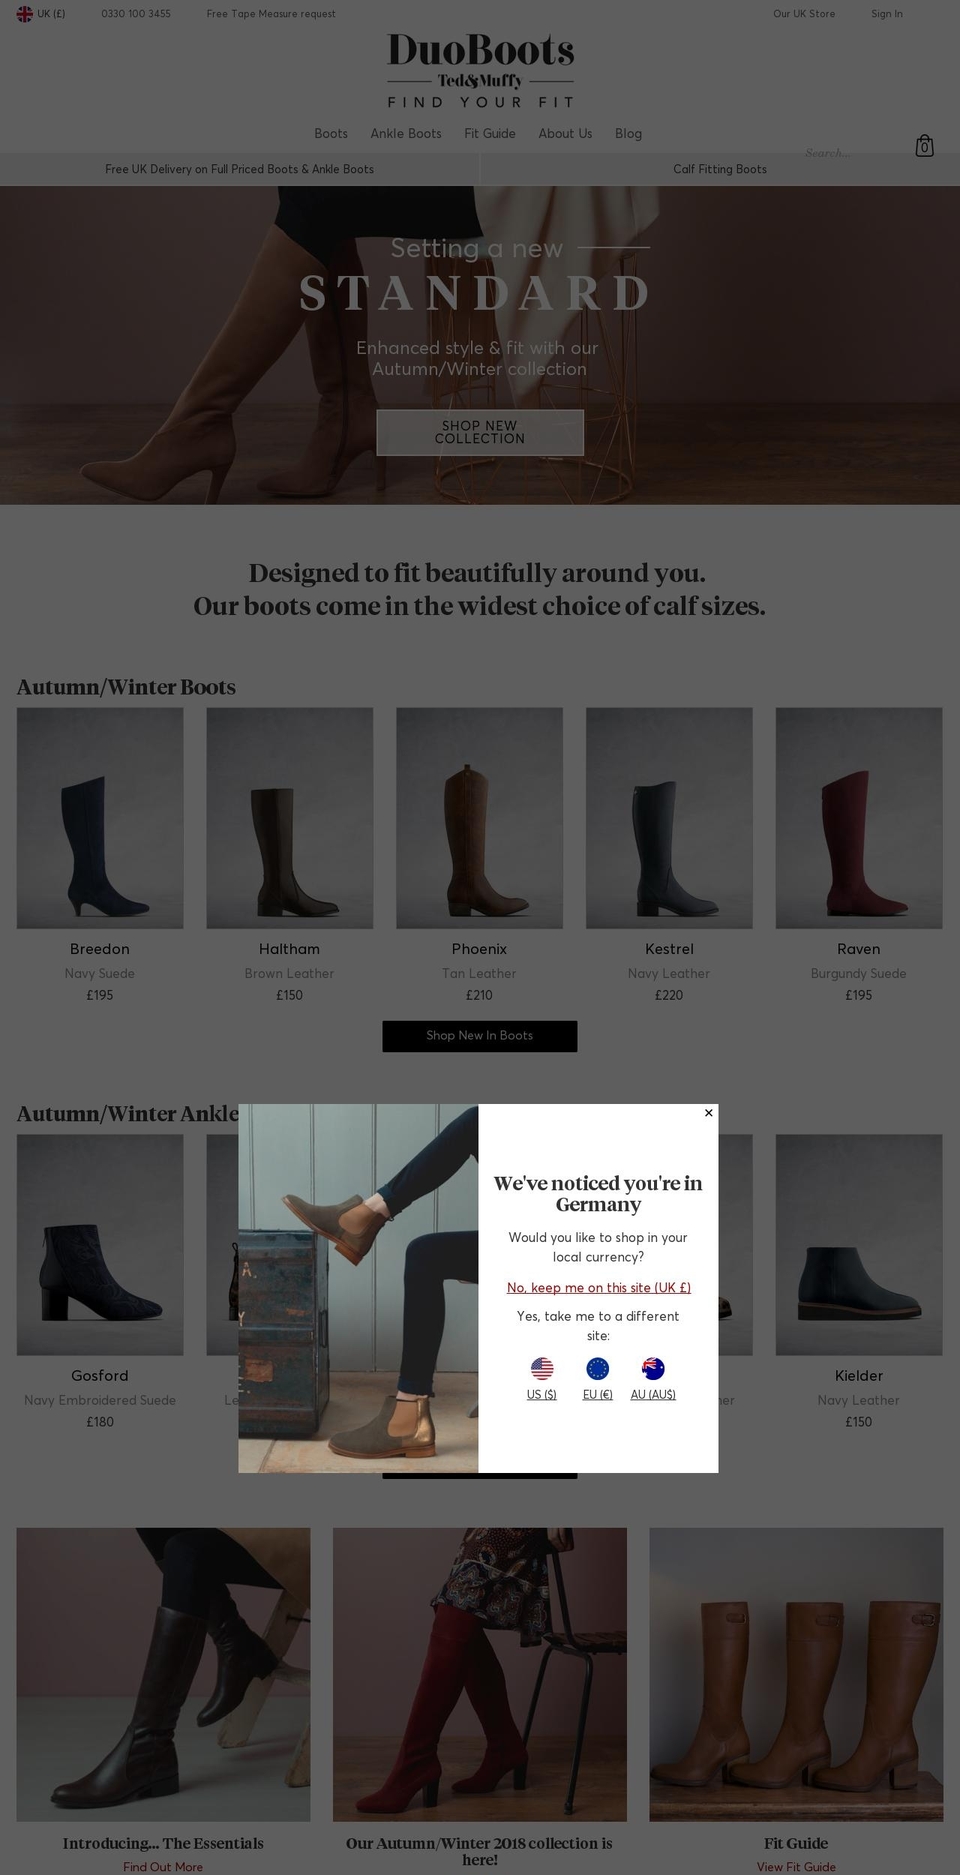 DuoBoots GBP V4.2 Shopify theme site example tedandmuffy.reviews